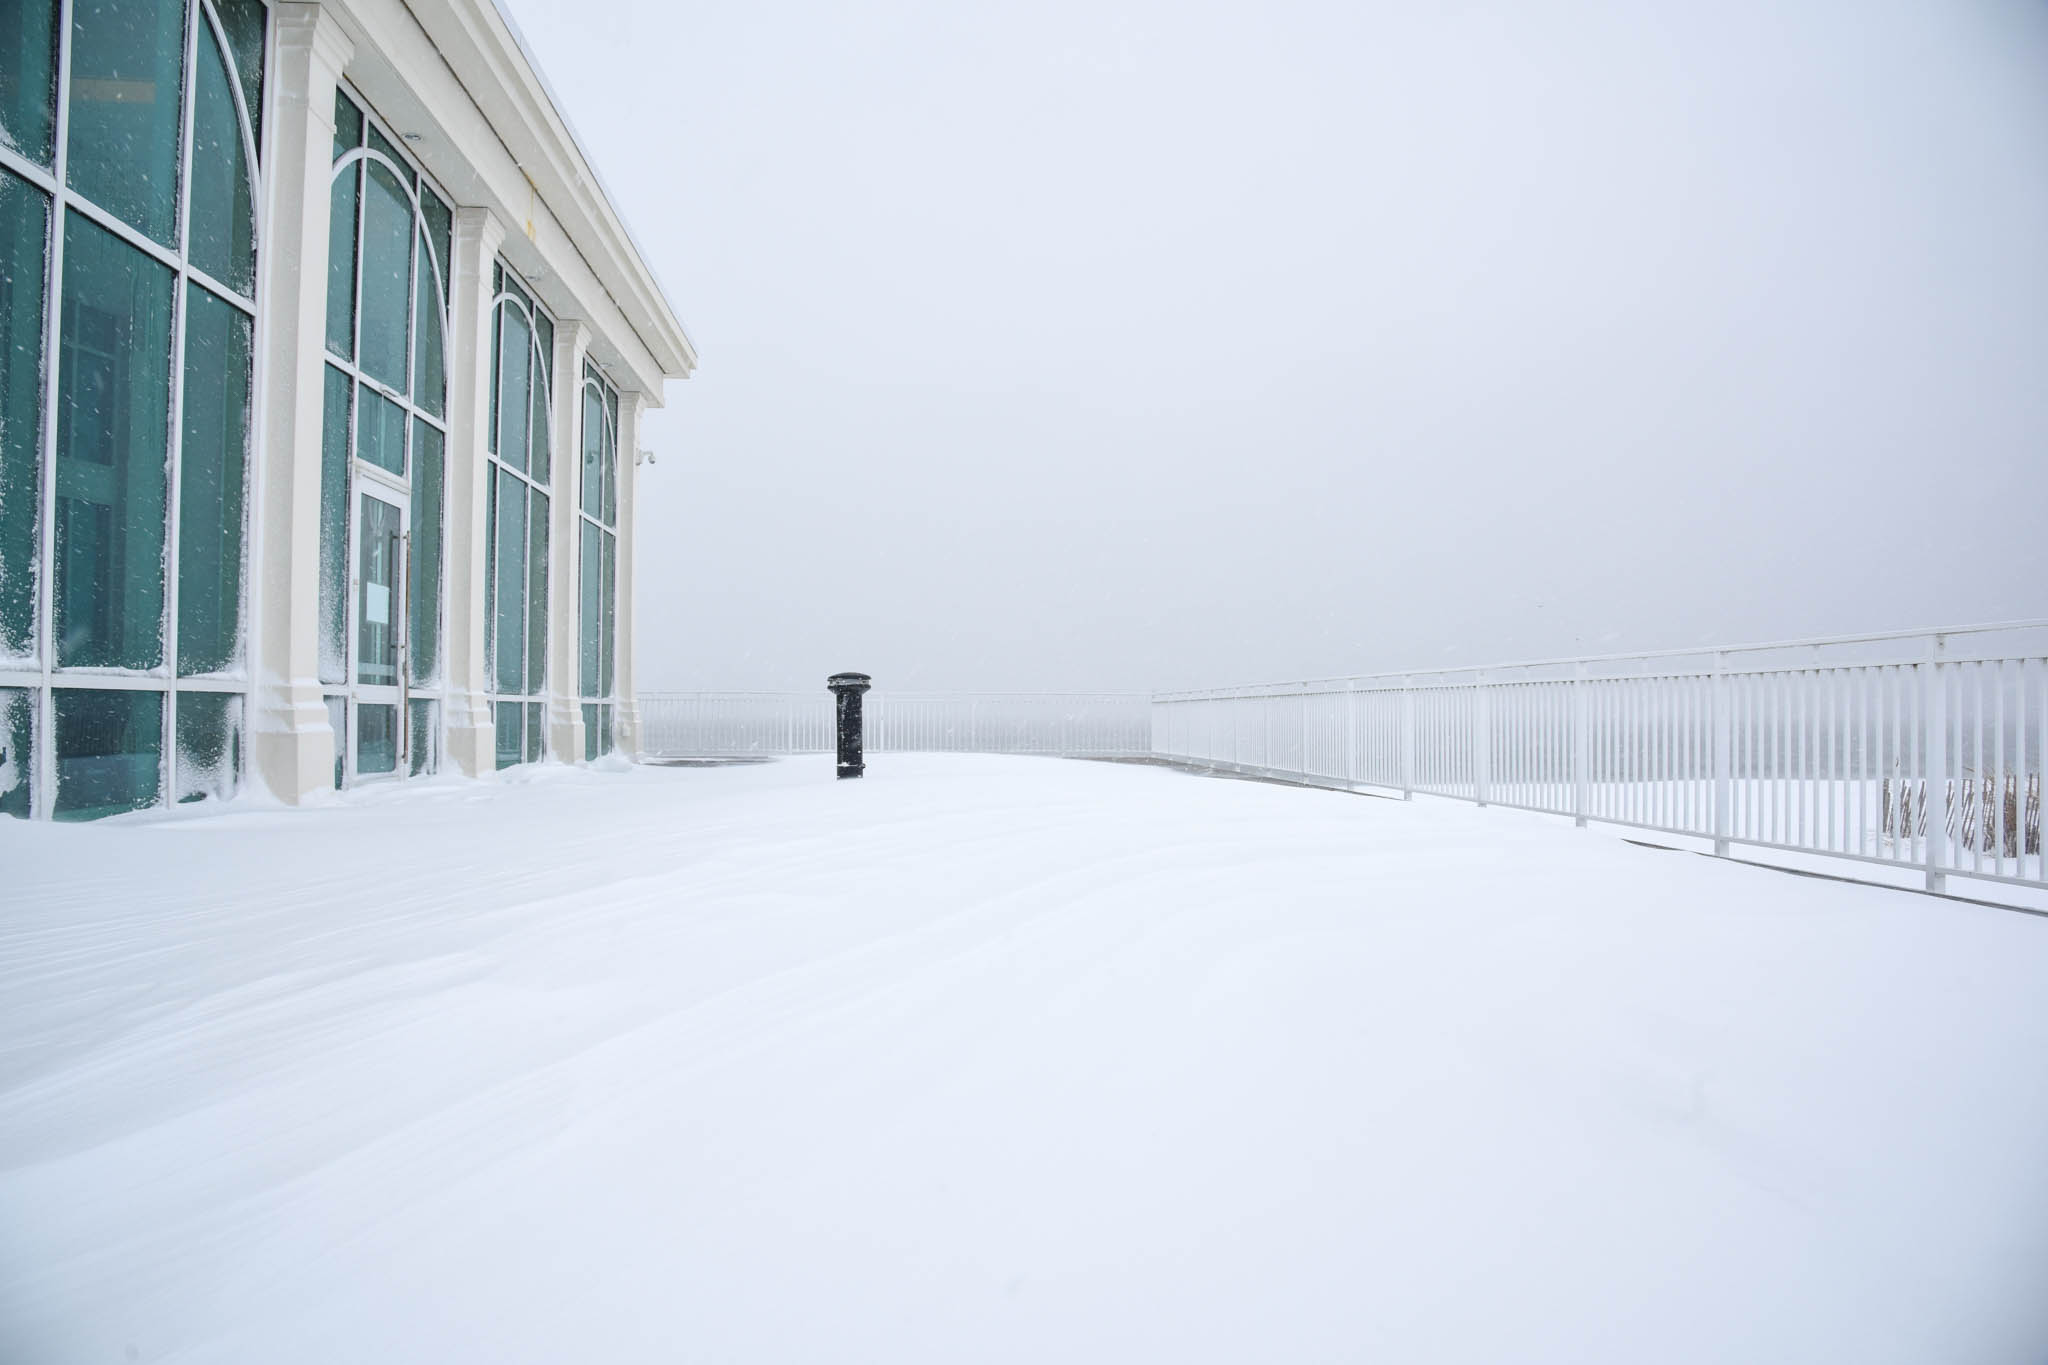 Cape May Convention Hall covered in snow